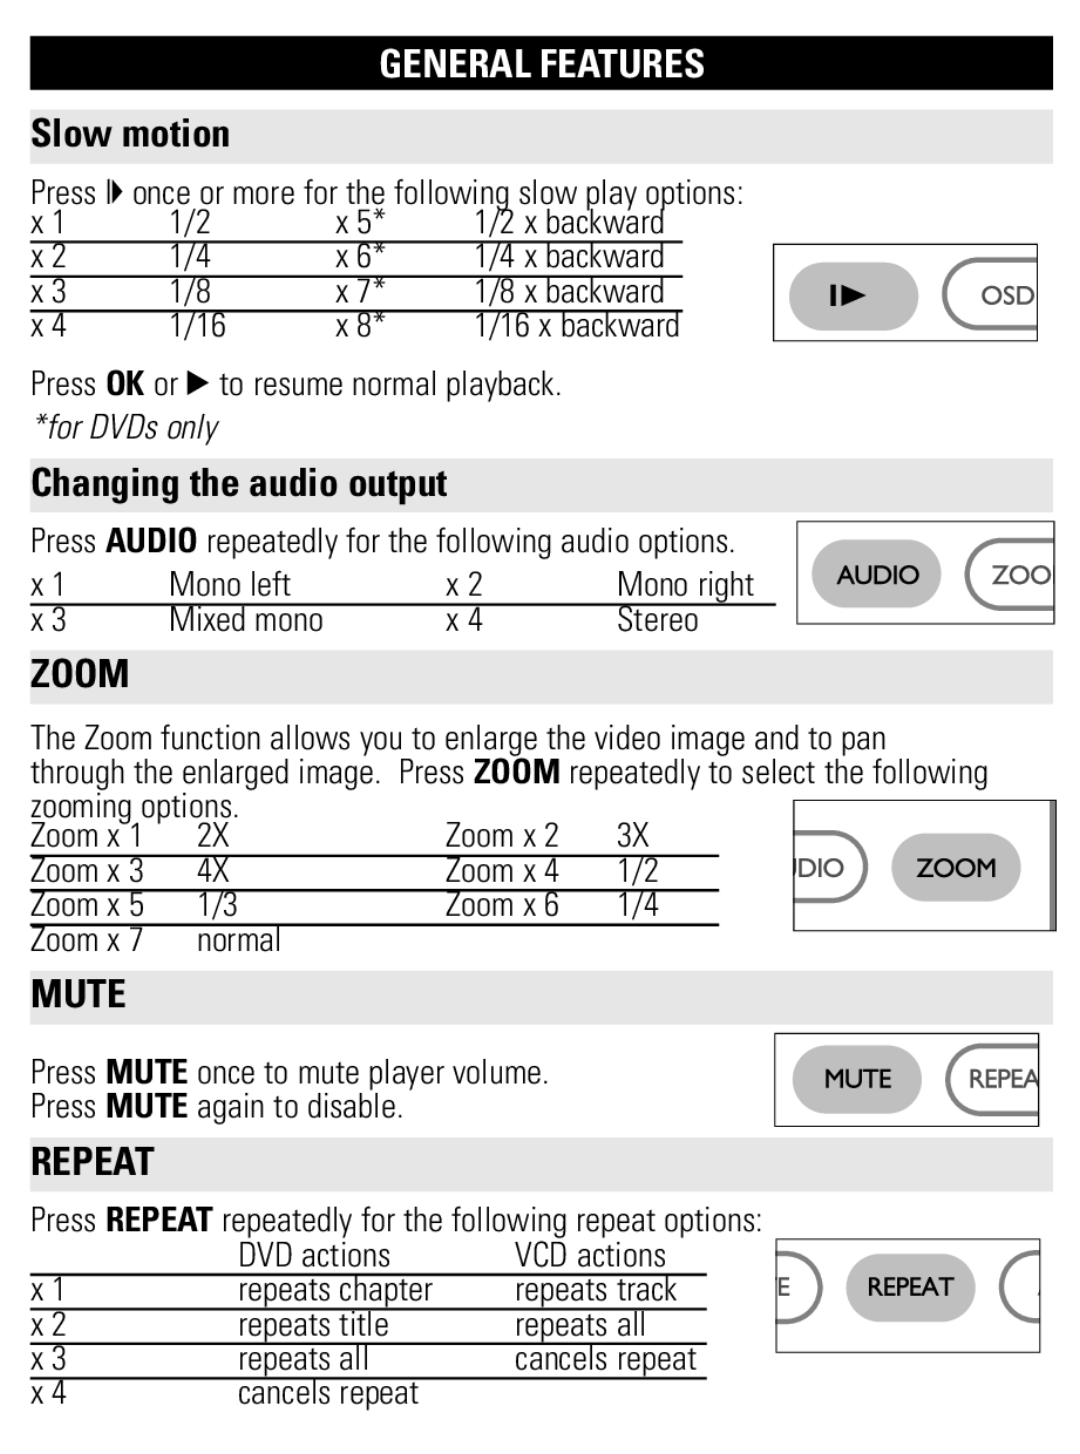 Philips PET1002 user manual Slow motion, Changing the audio output, Zoom, Mute, Repeat, General Features 